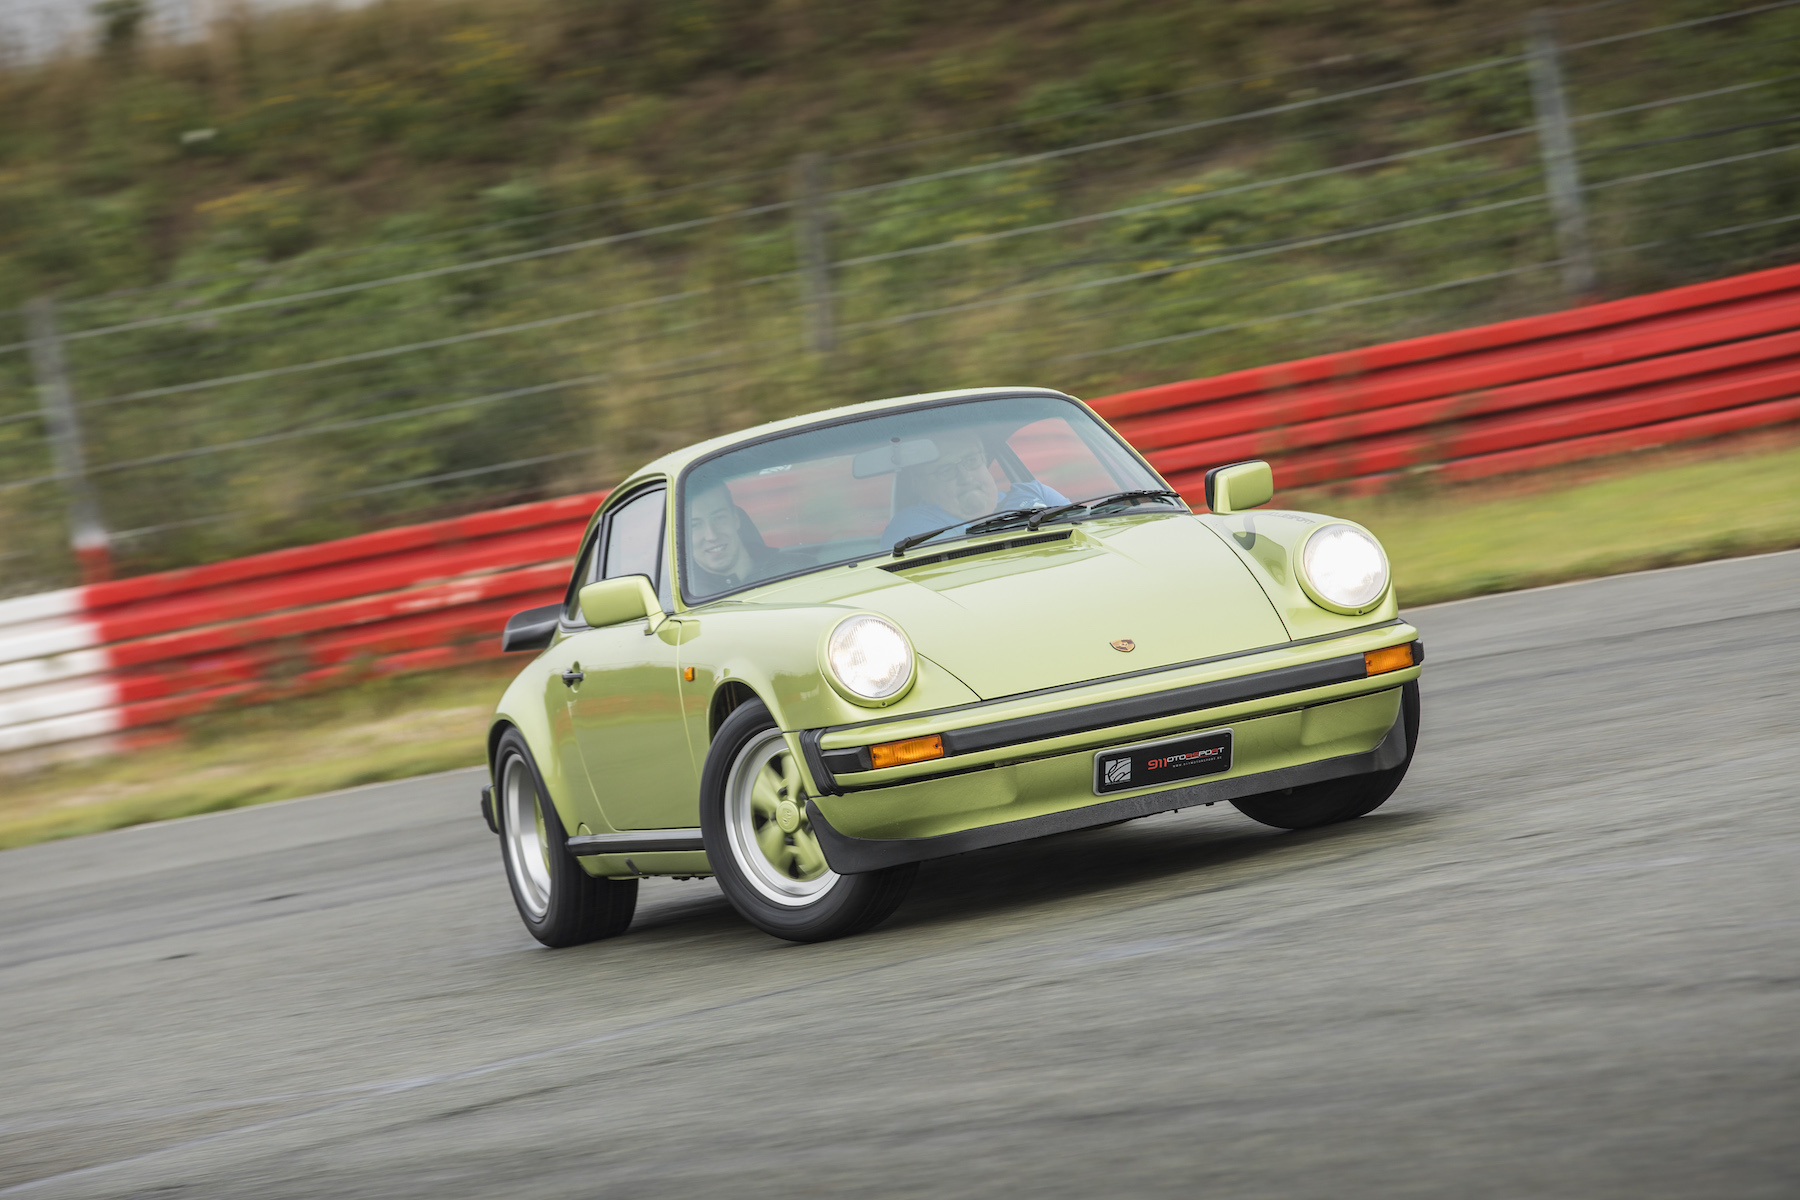  Carrera Clubsport: the lightweight special - Total 911